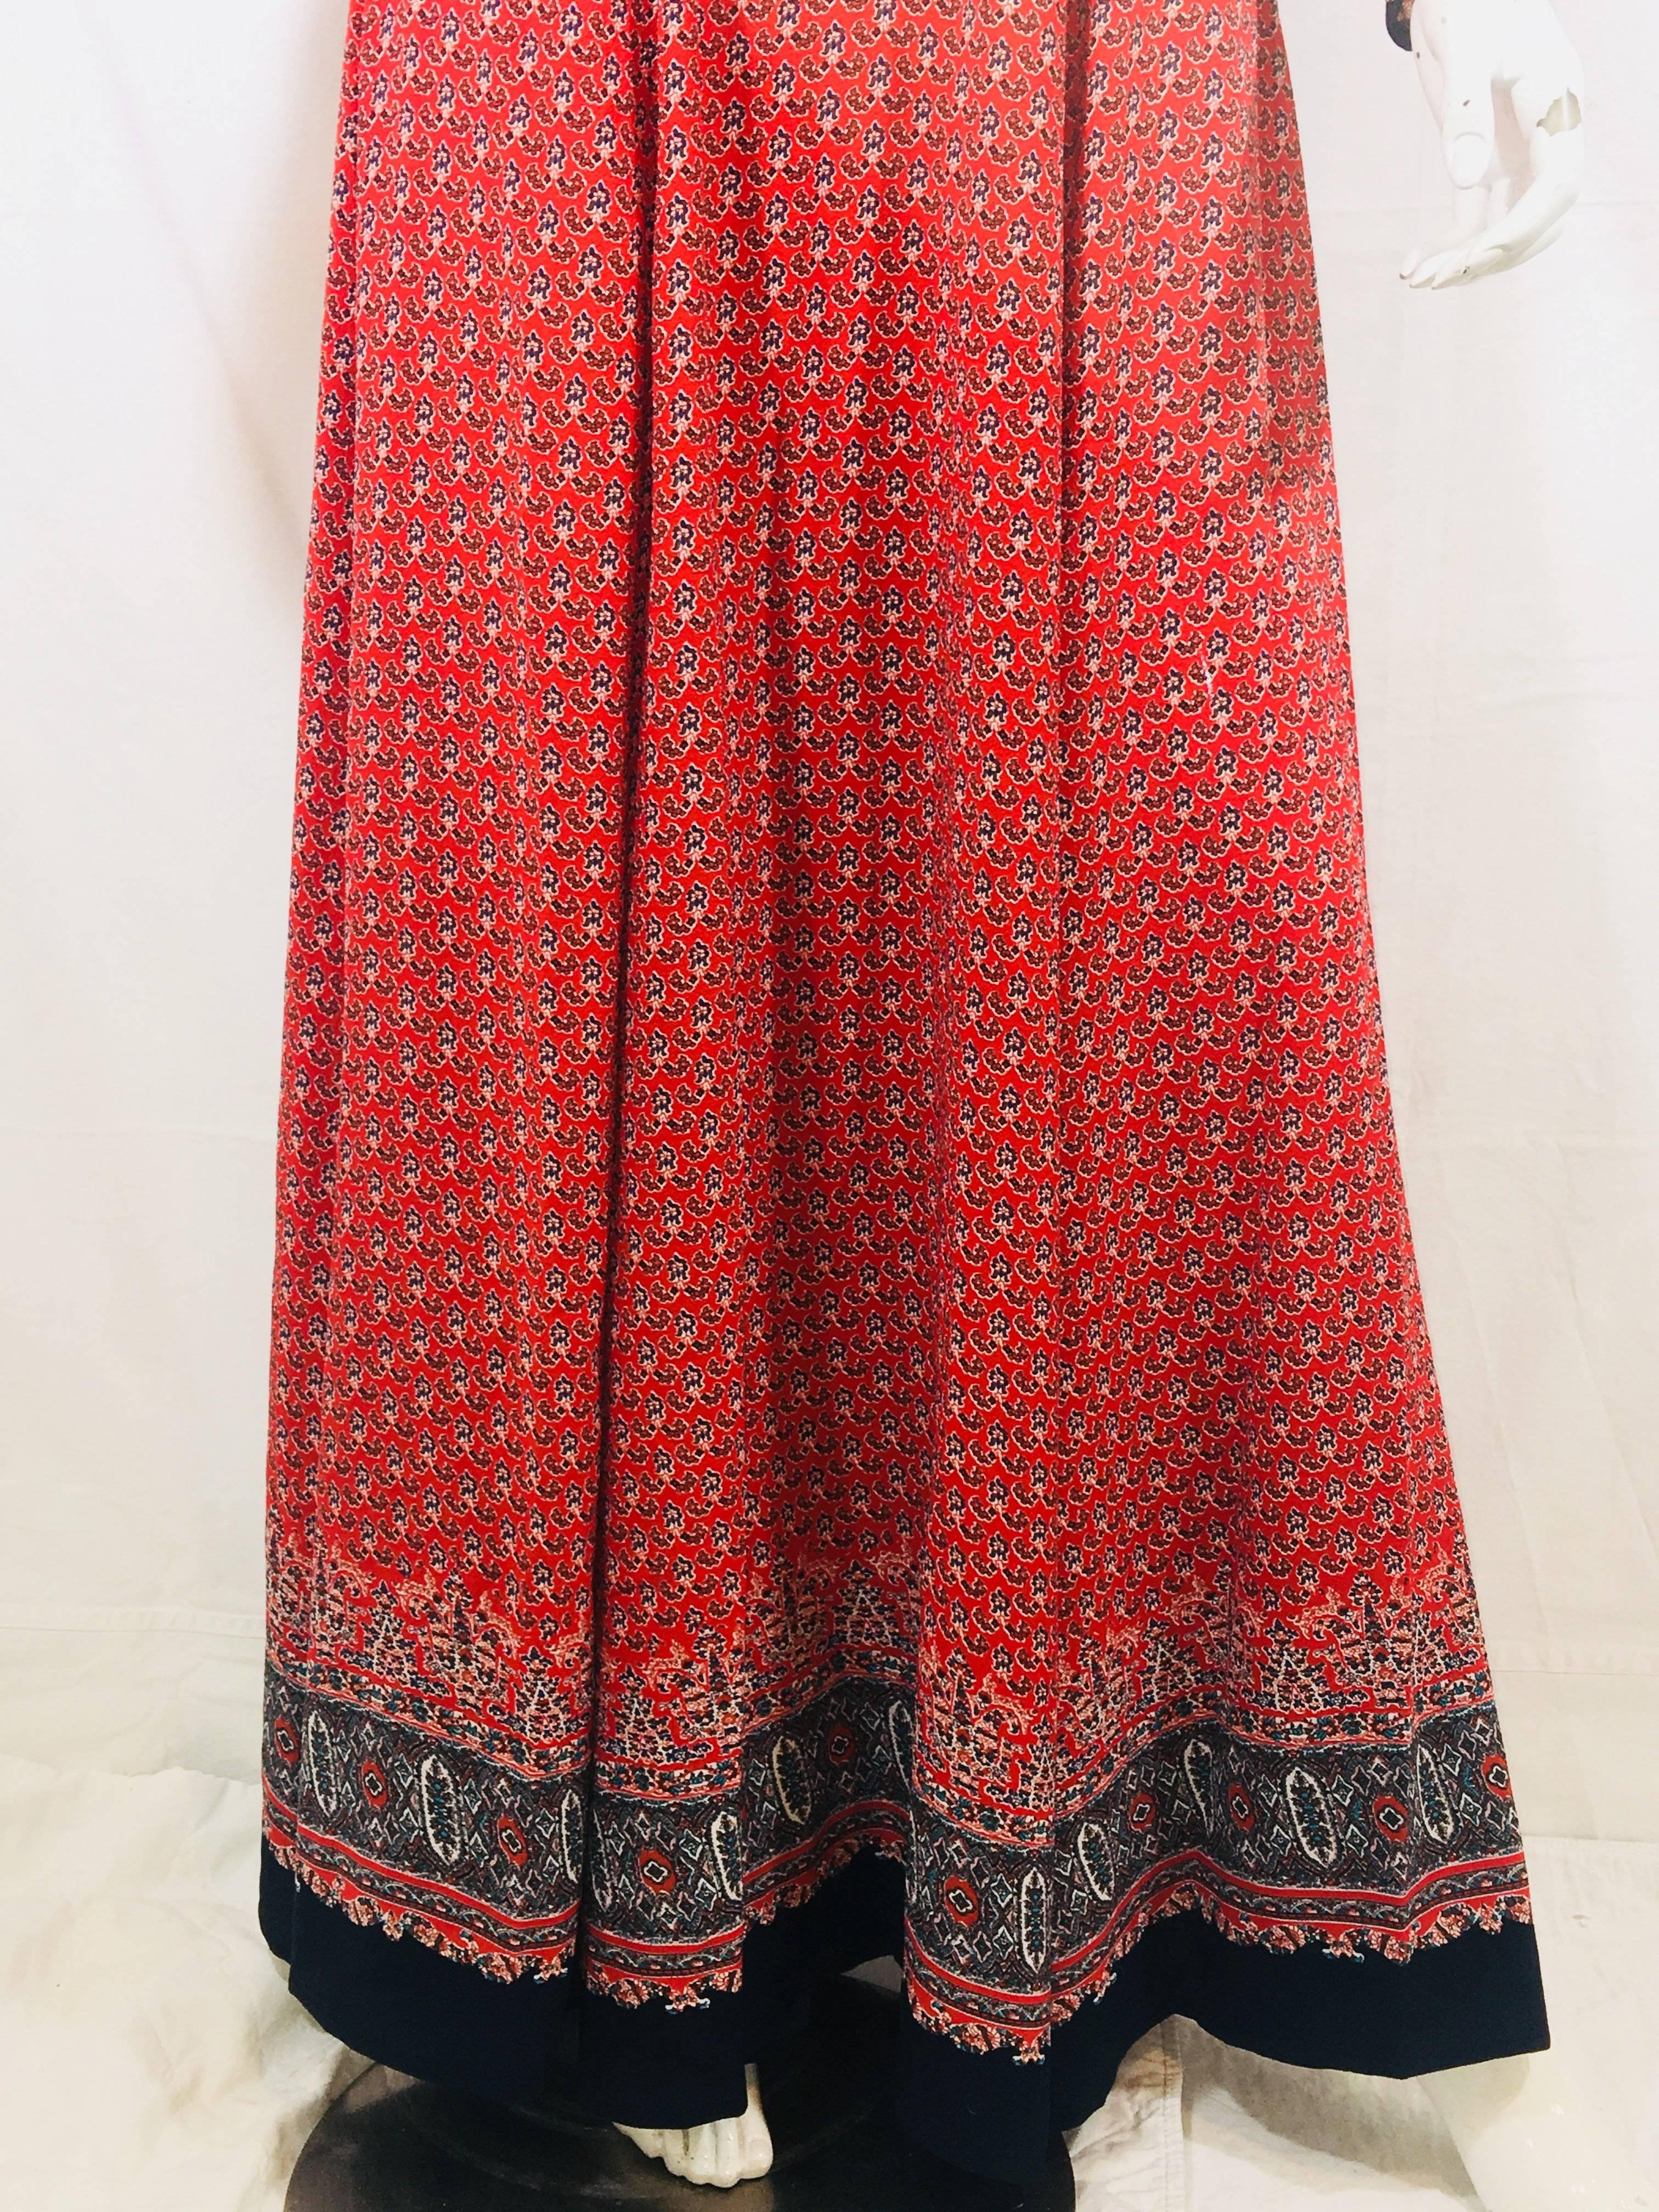 Glamorous Maxi Dress with 3/4 Sleeves and All Over Floral Print and Lace Up Chest and Side Zipper. New with Tags!